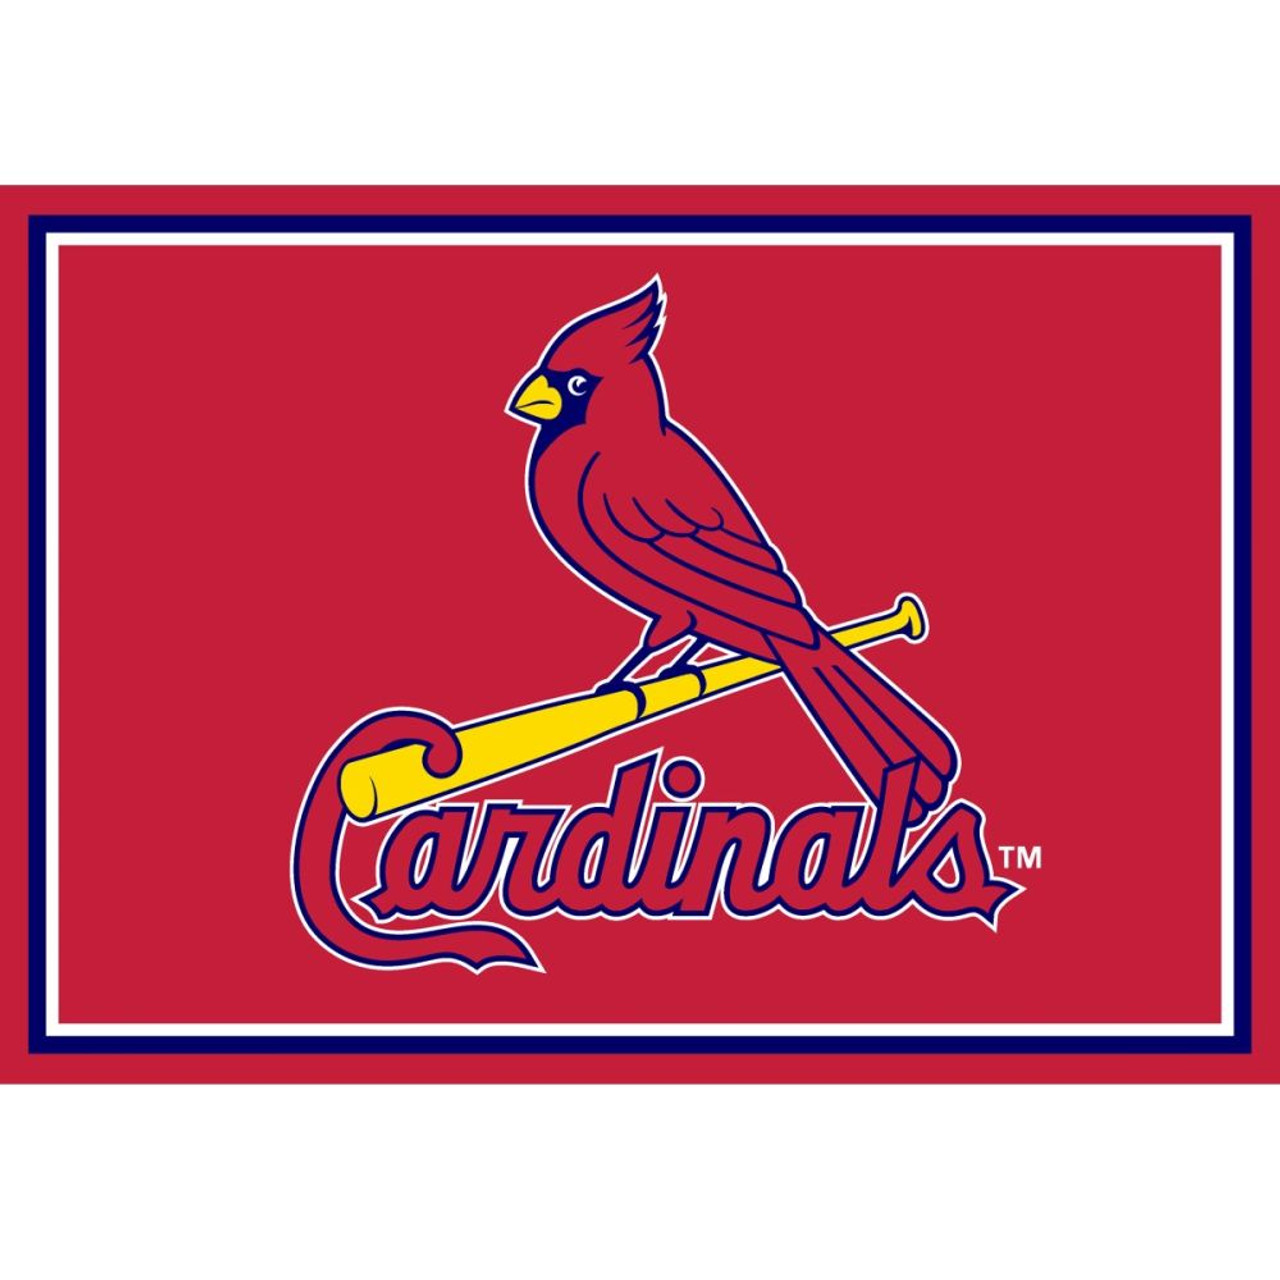 569-2008, STL, St Louis, Cards, Cardinals, 3x4, Area, Rug, MLB, Imperial, Billiards, 720801131641